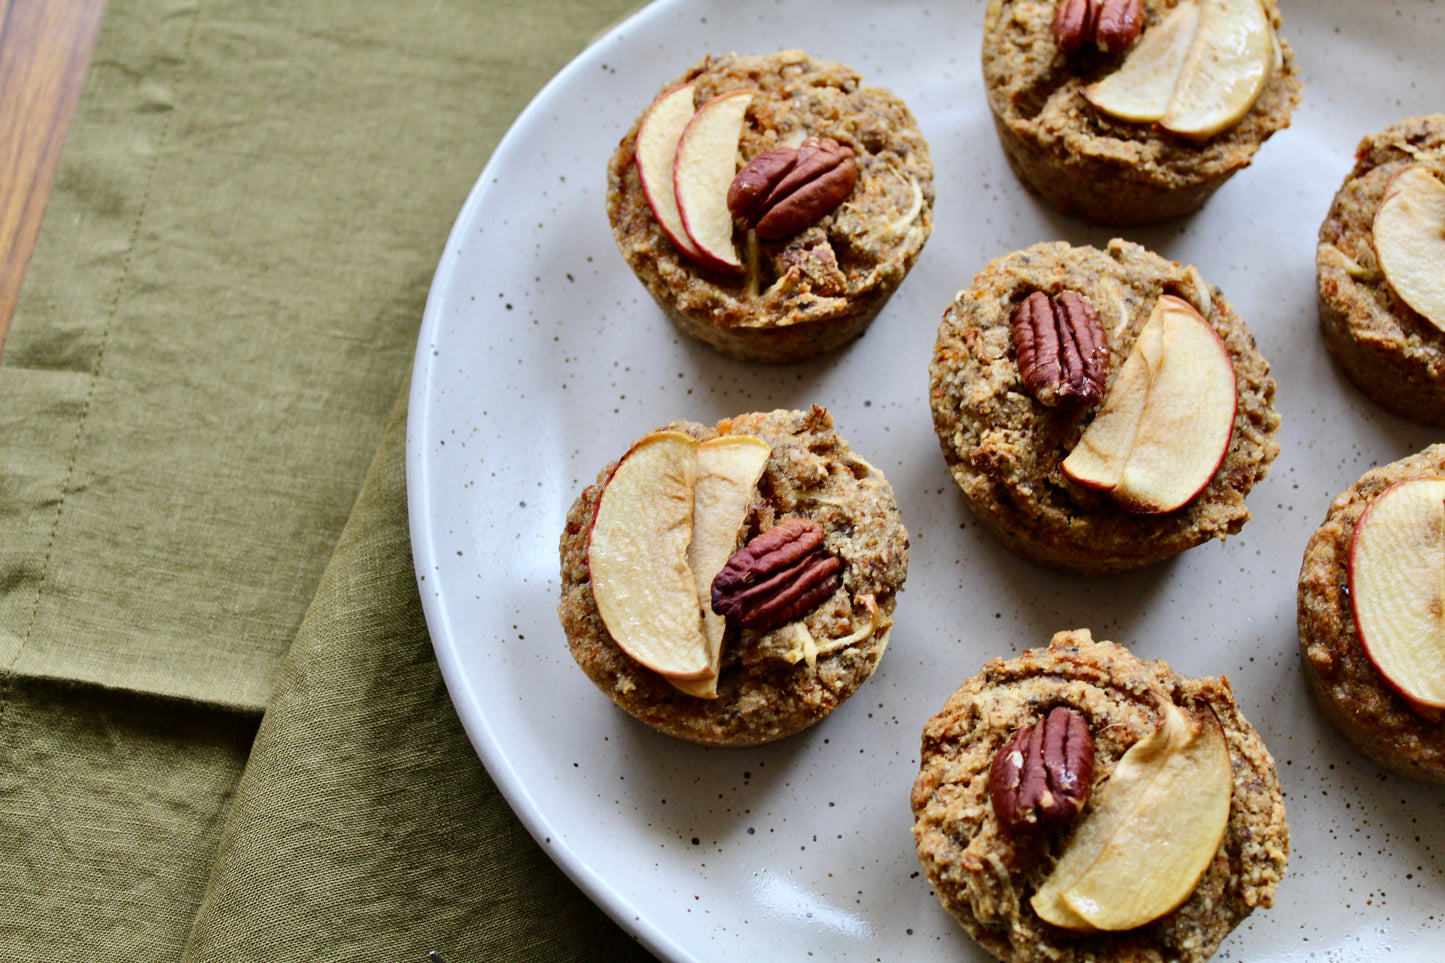 SPICED CARROT, APPLE + PECAN MUFFINS